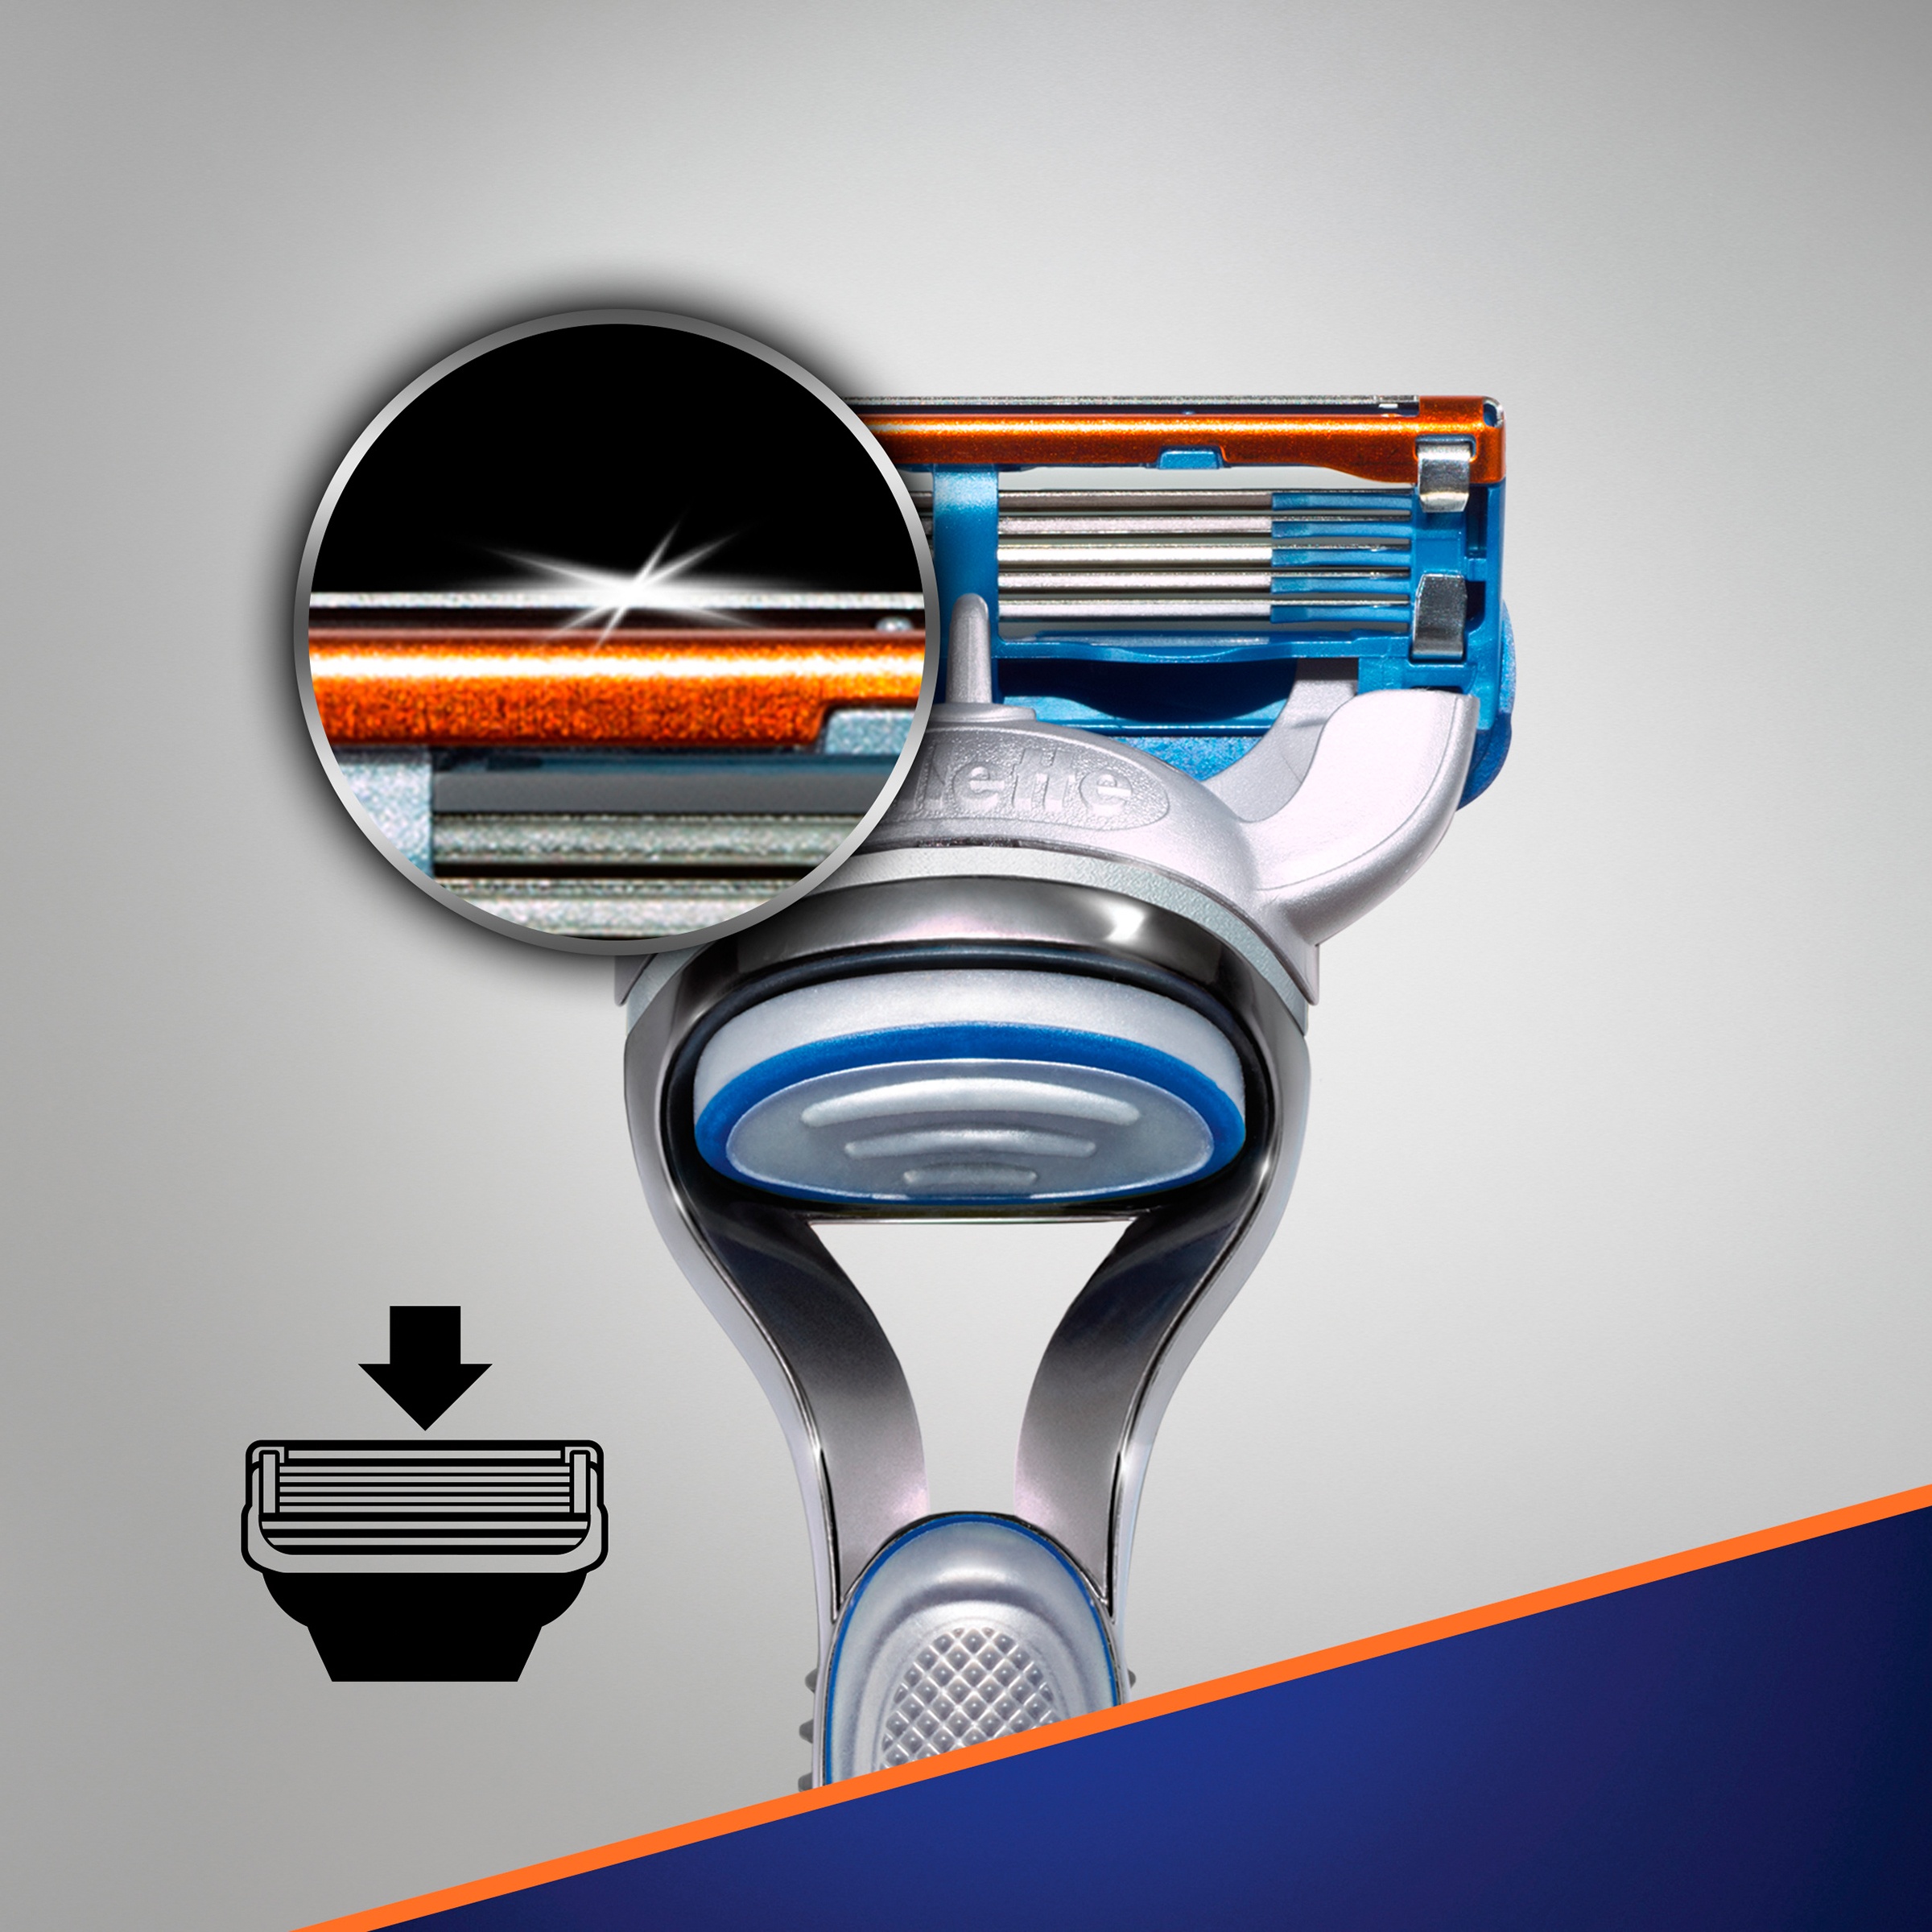 Gillette Fusion5 Razor Gift Pack - image 2 of 8